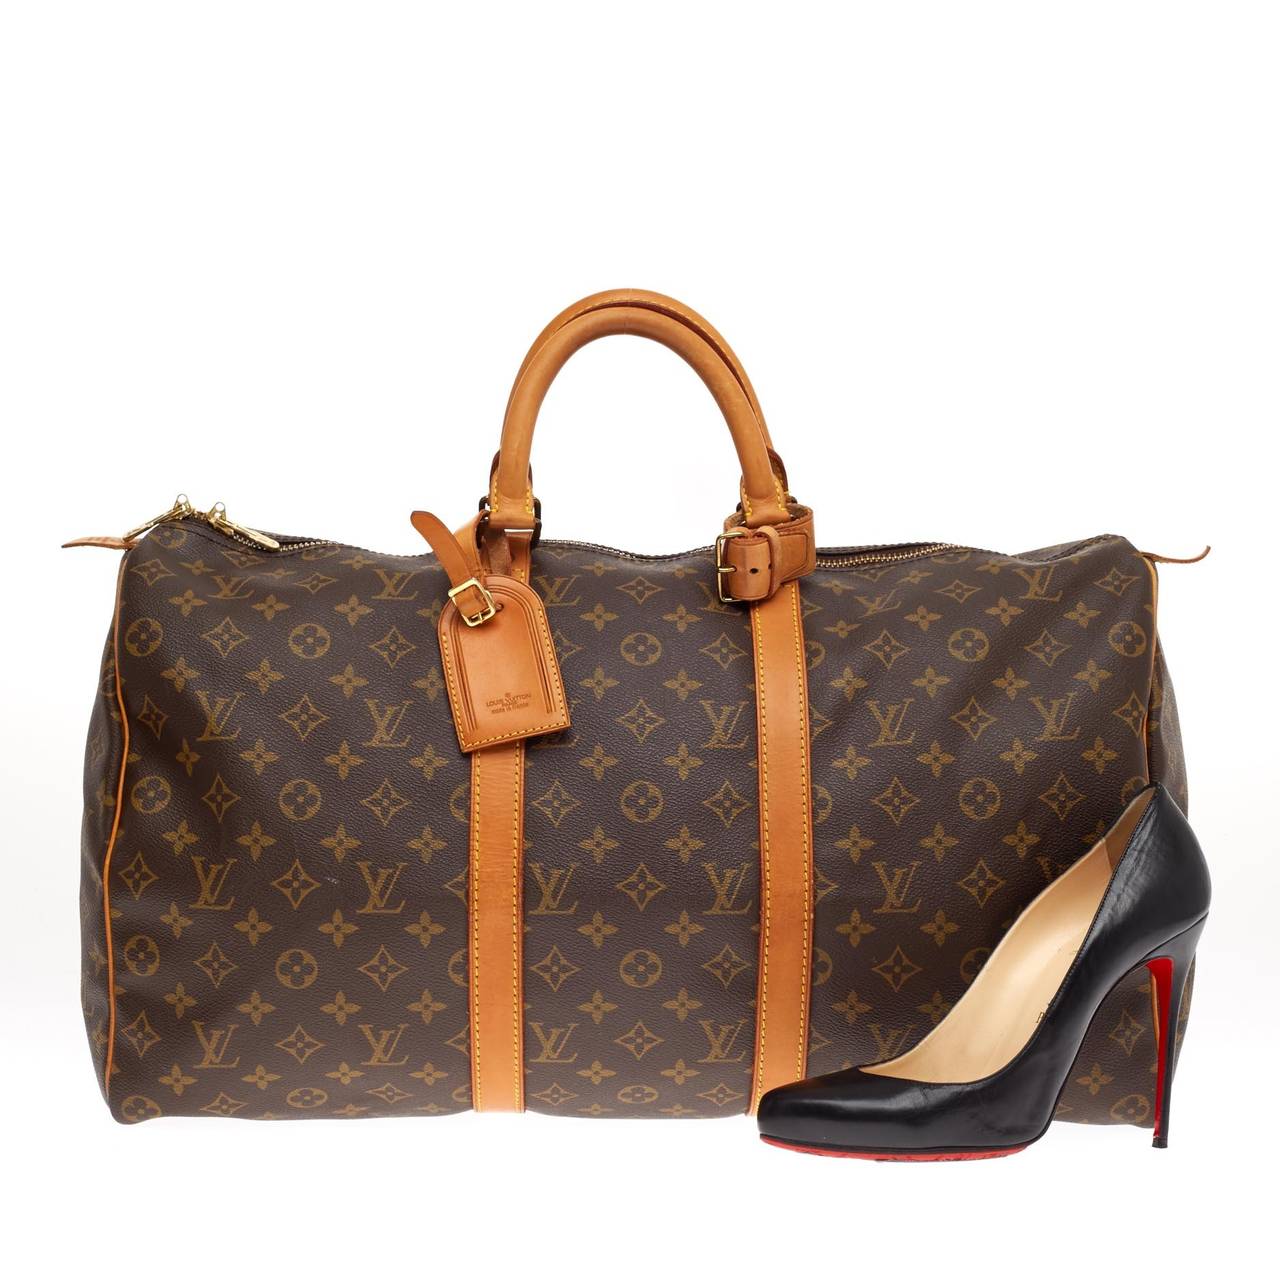 This authentic Louis Vuitton Keepall in size 50 features the brand's timeless travel bags in monogram canvas print. Its roomy interior and lightweight structure makes it the perfect travel companion. This duffle is accented with brown natural